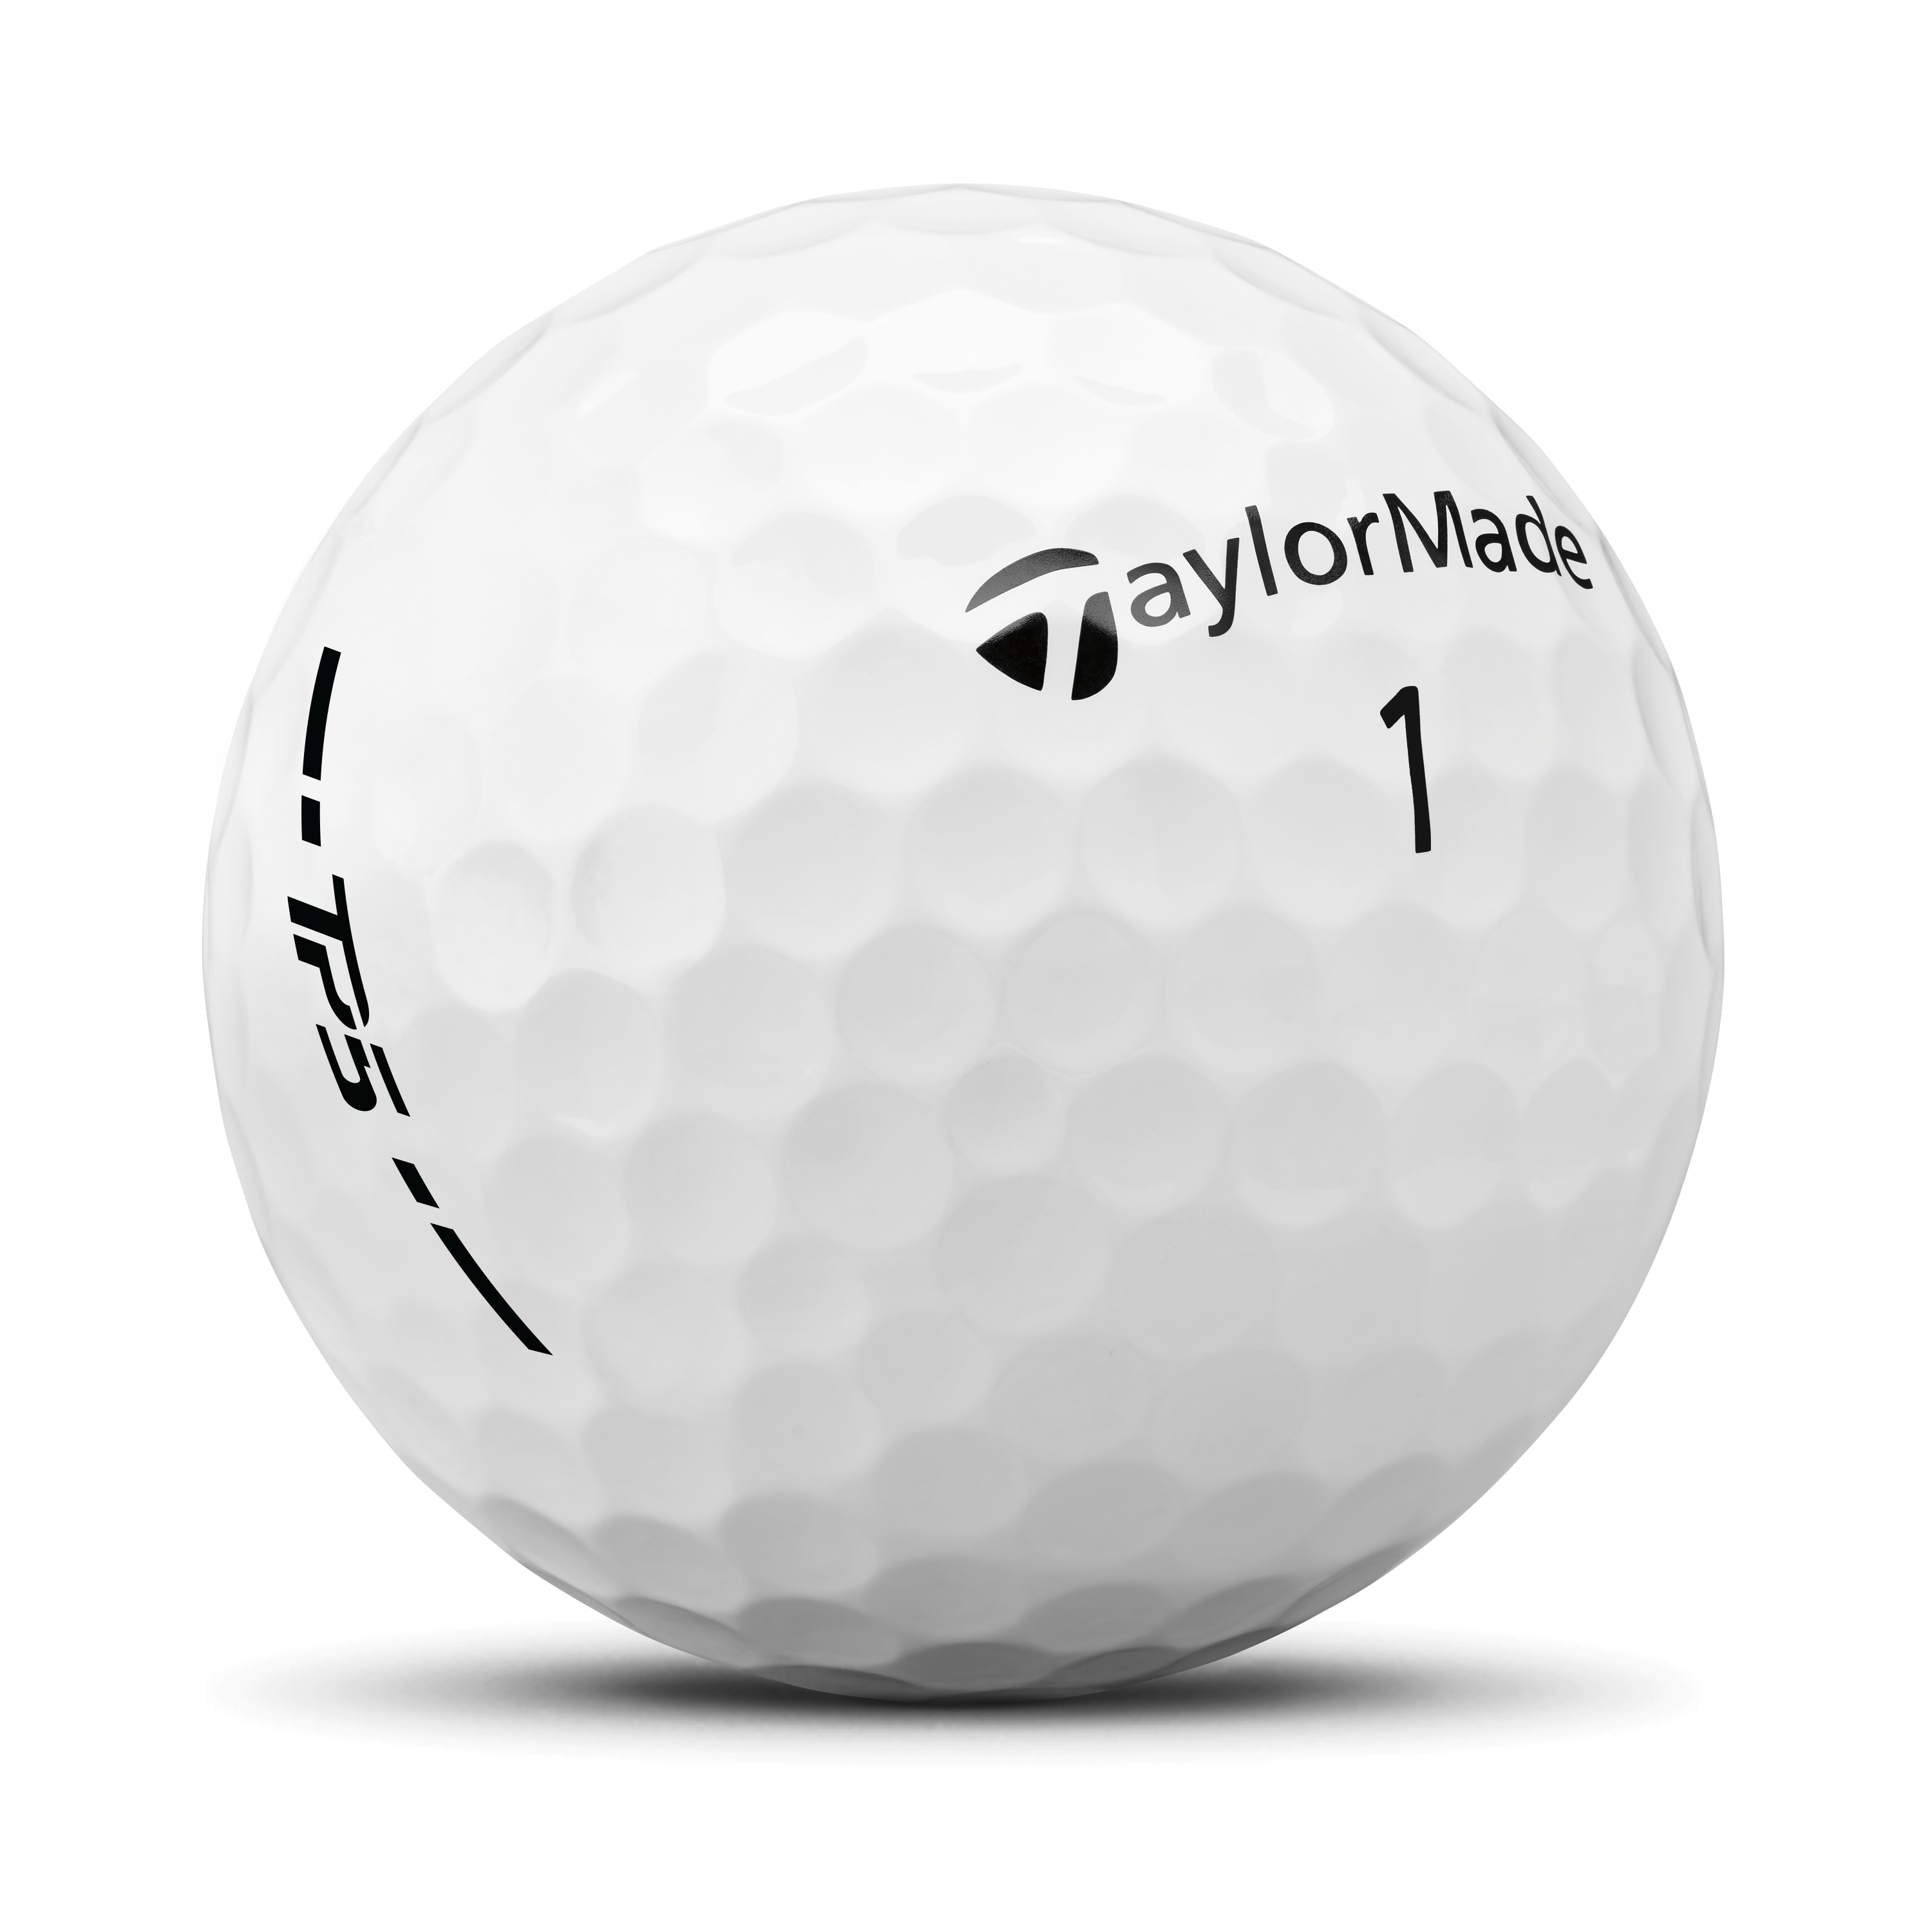 TaylorMade TP5 4 For 3 Golf Balls